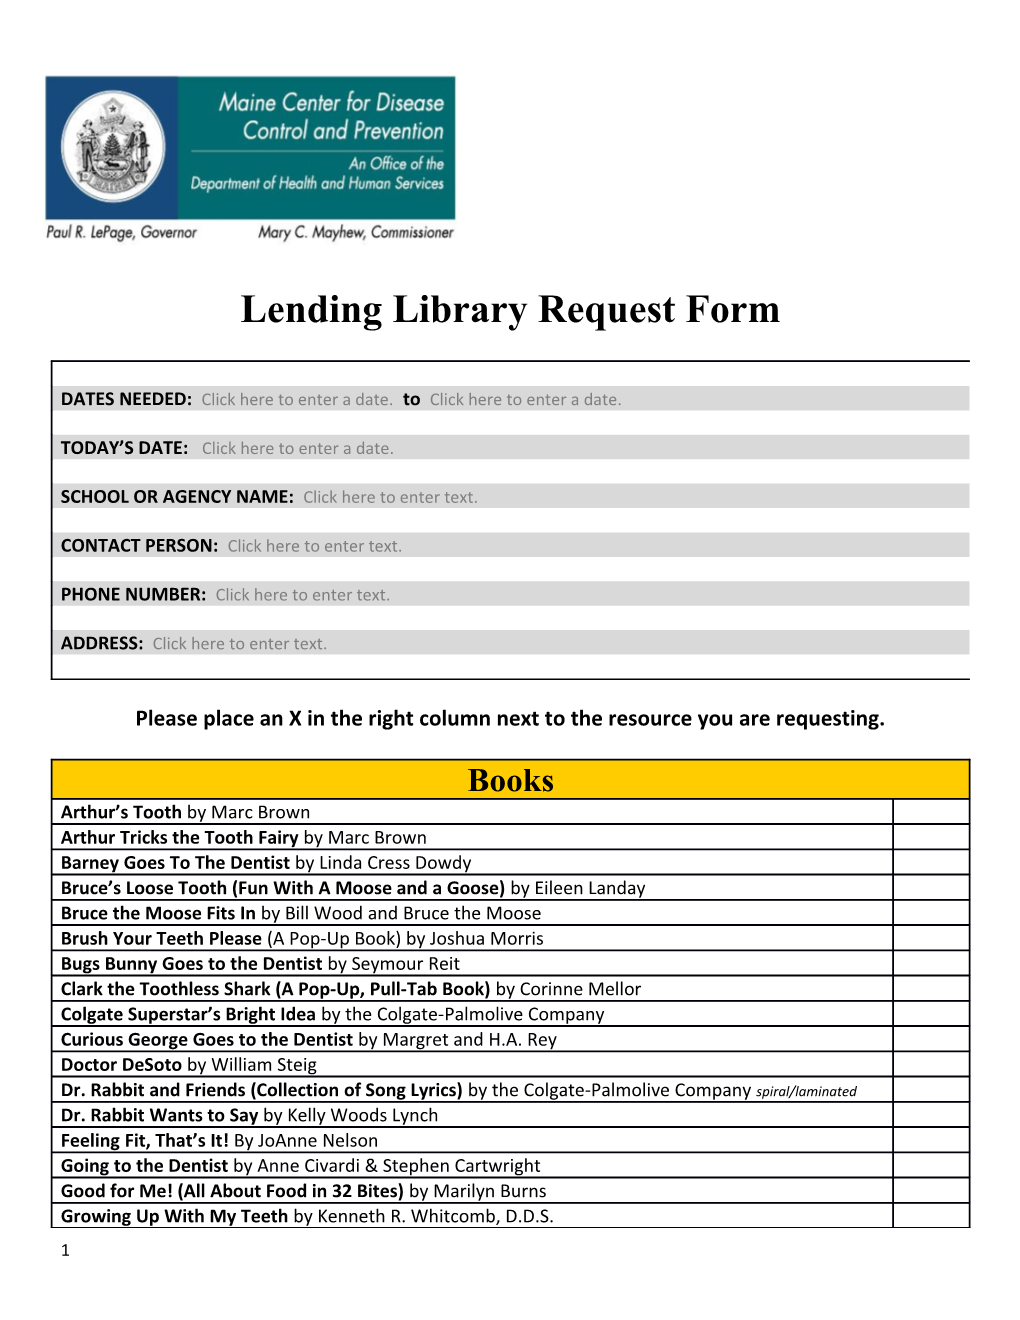 Lending Library Request Form